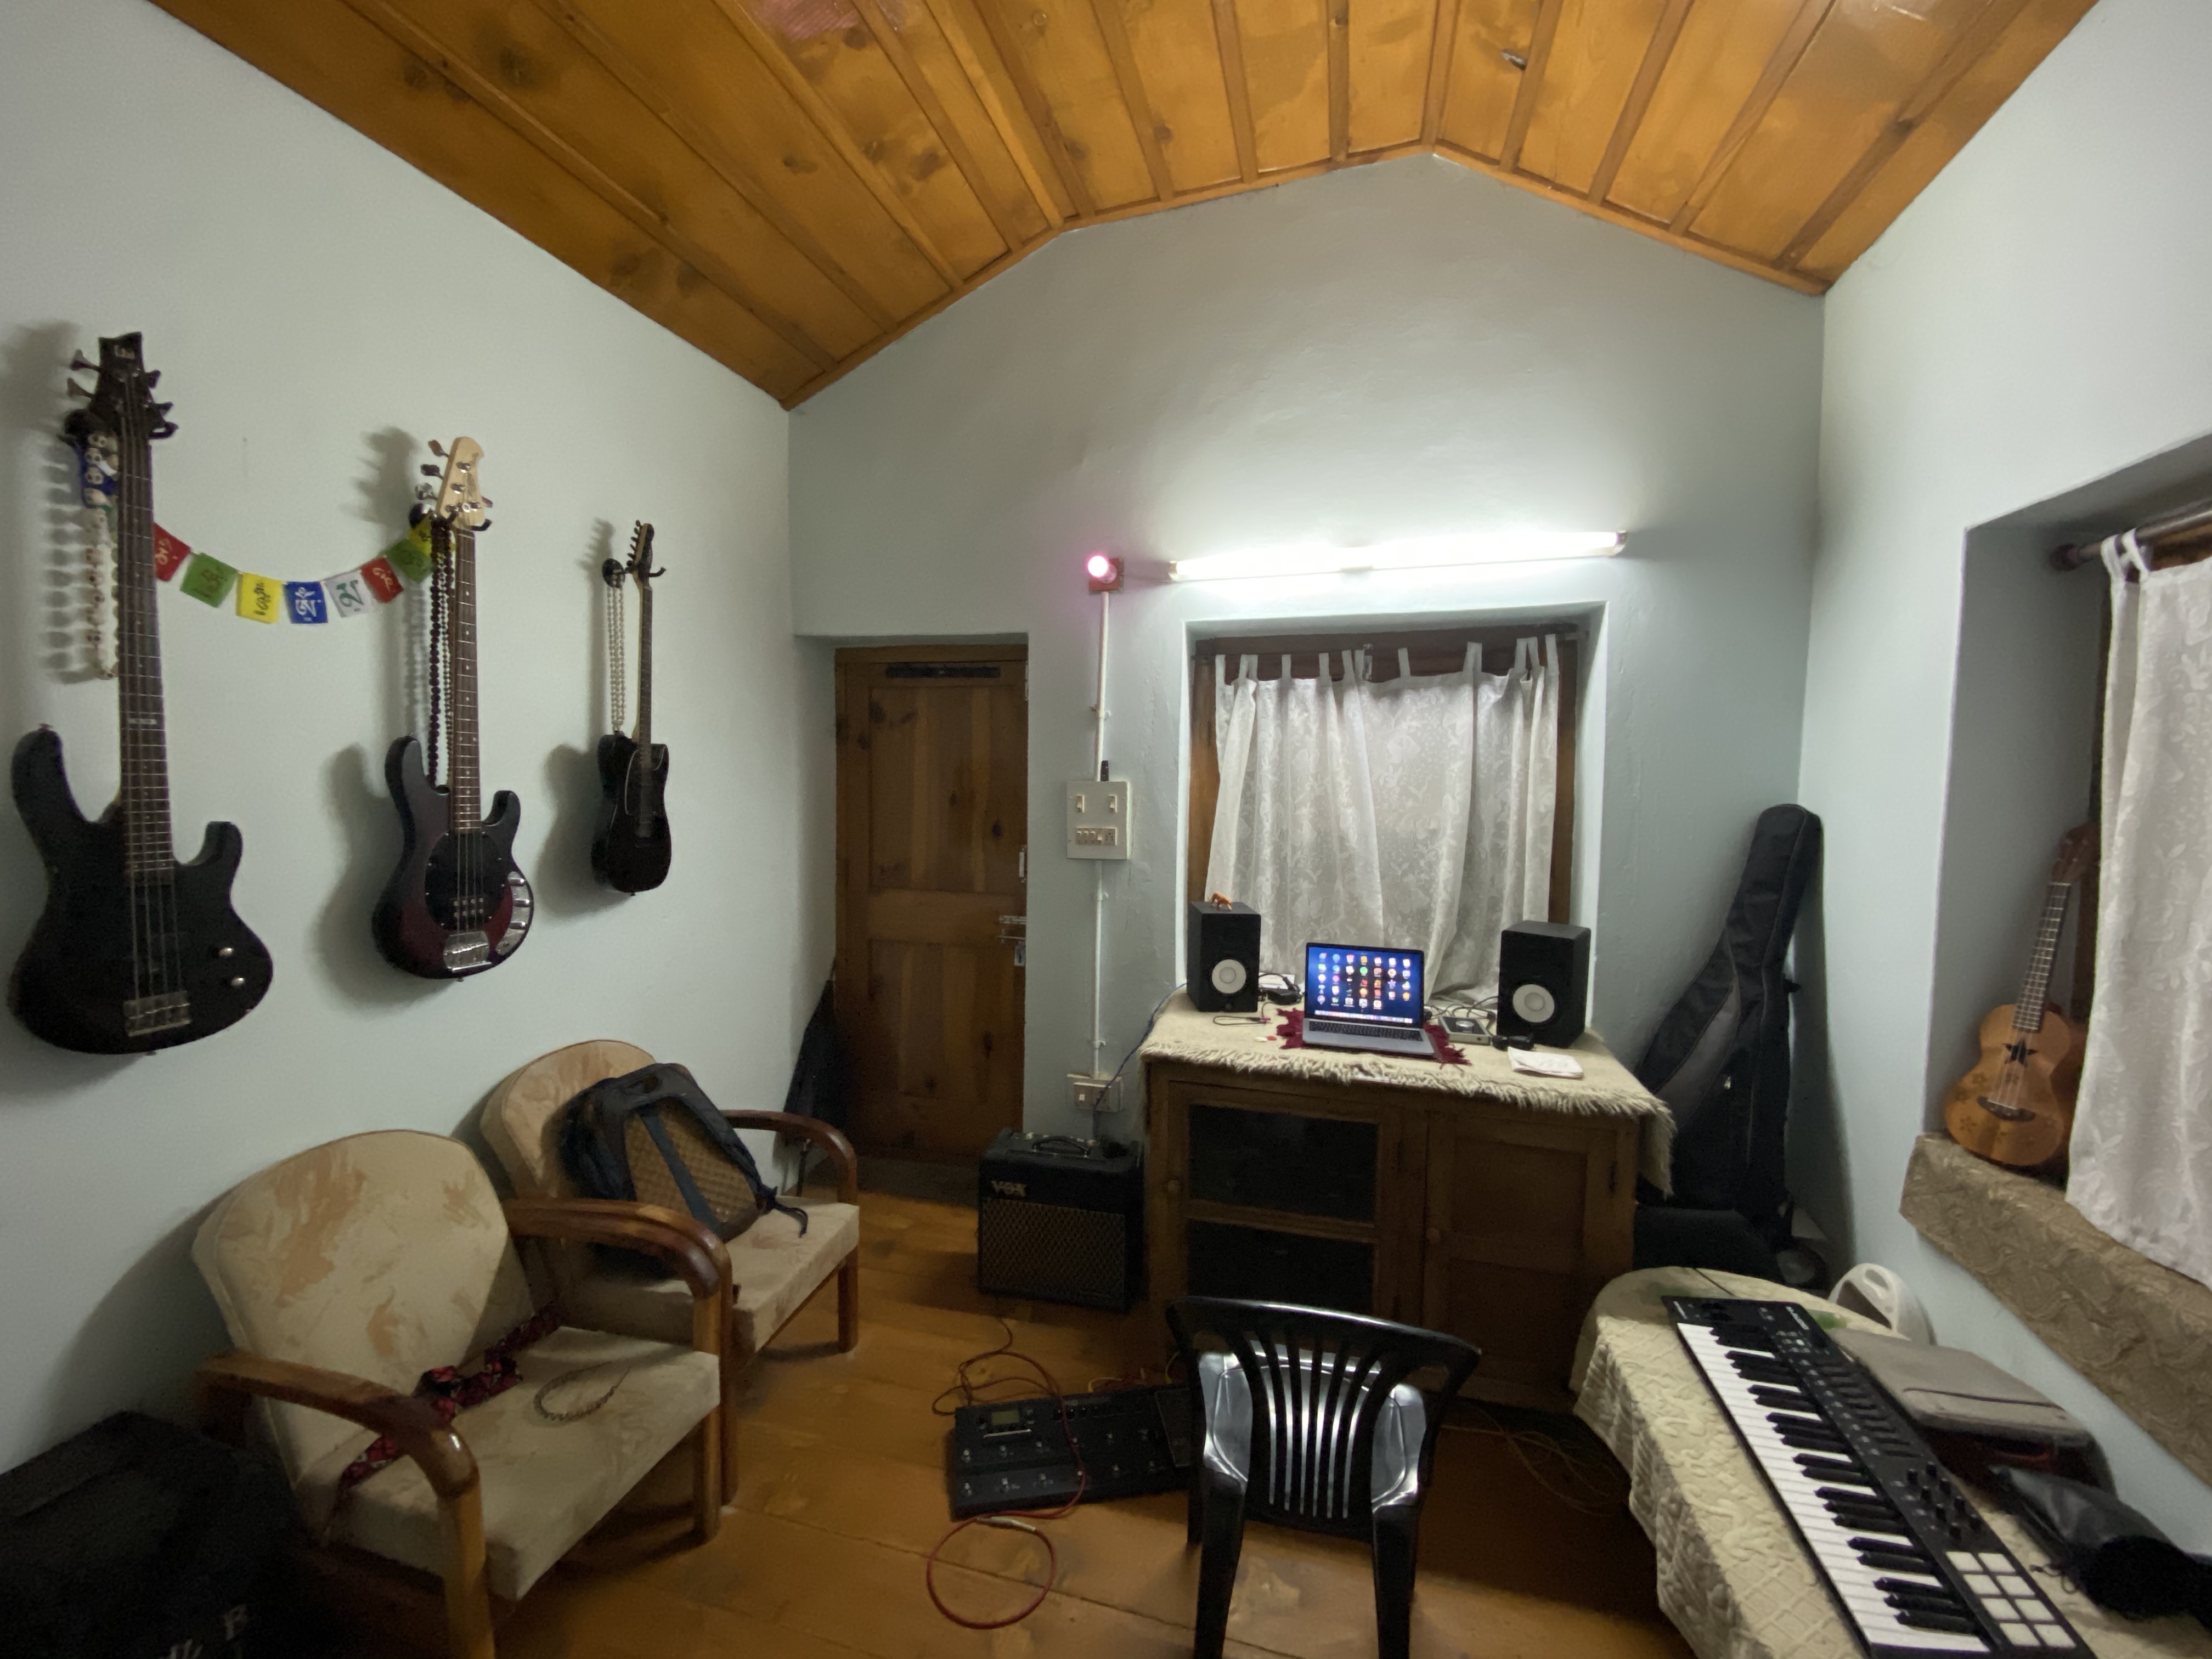 Bring the Studio Tour to Your Home - Studio Tour at Home